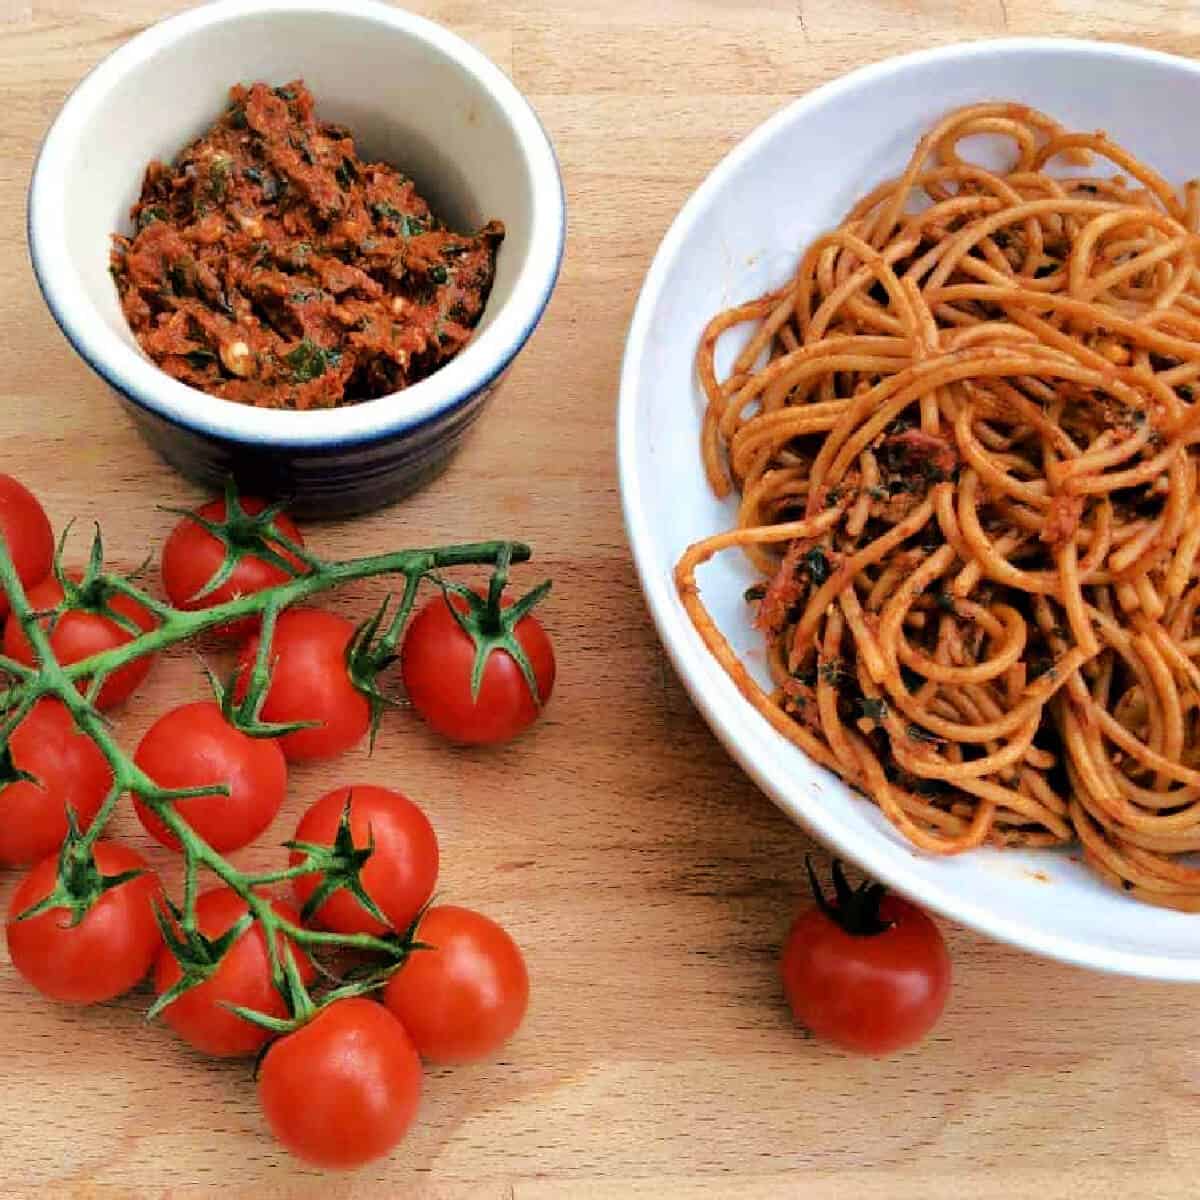 Bowl of spaghetti, vine tomatoes and pot of red pesto.